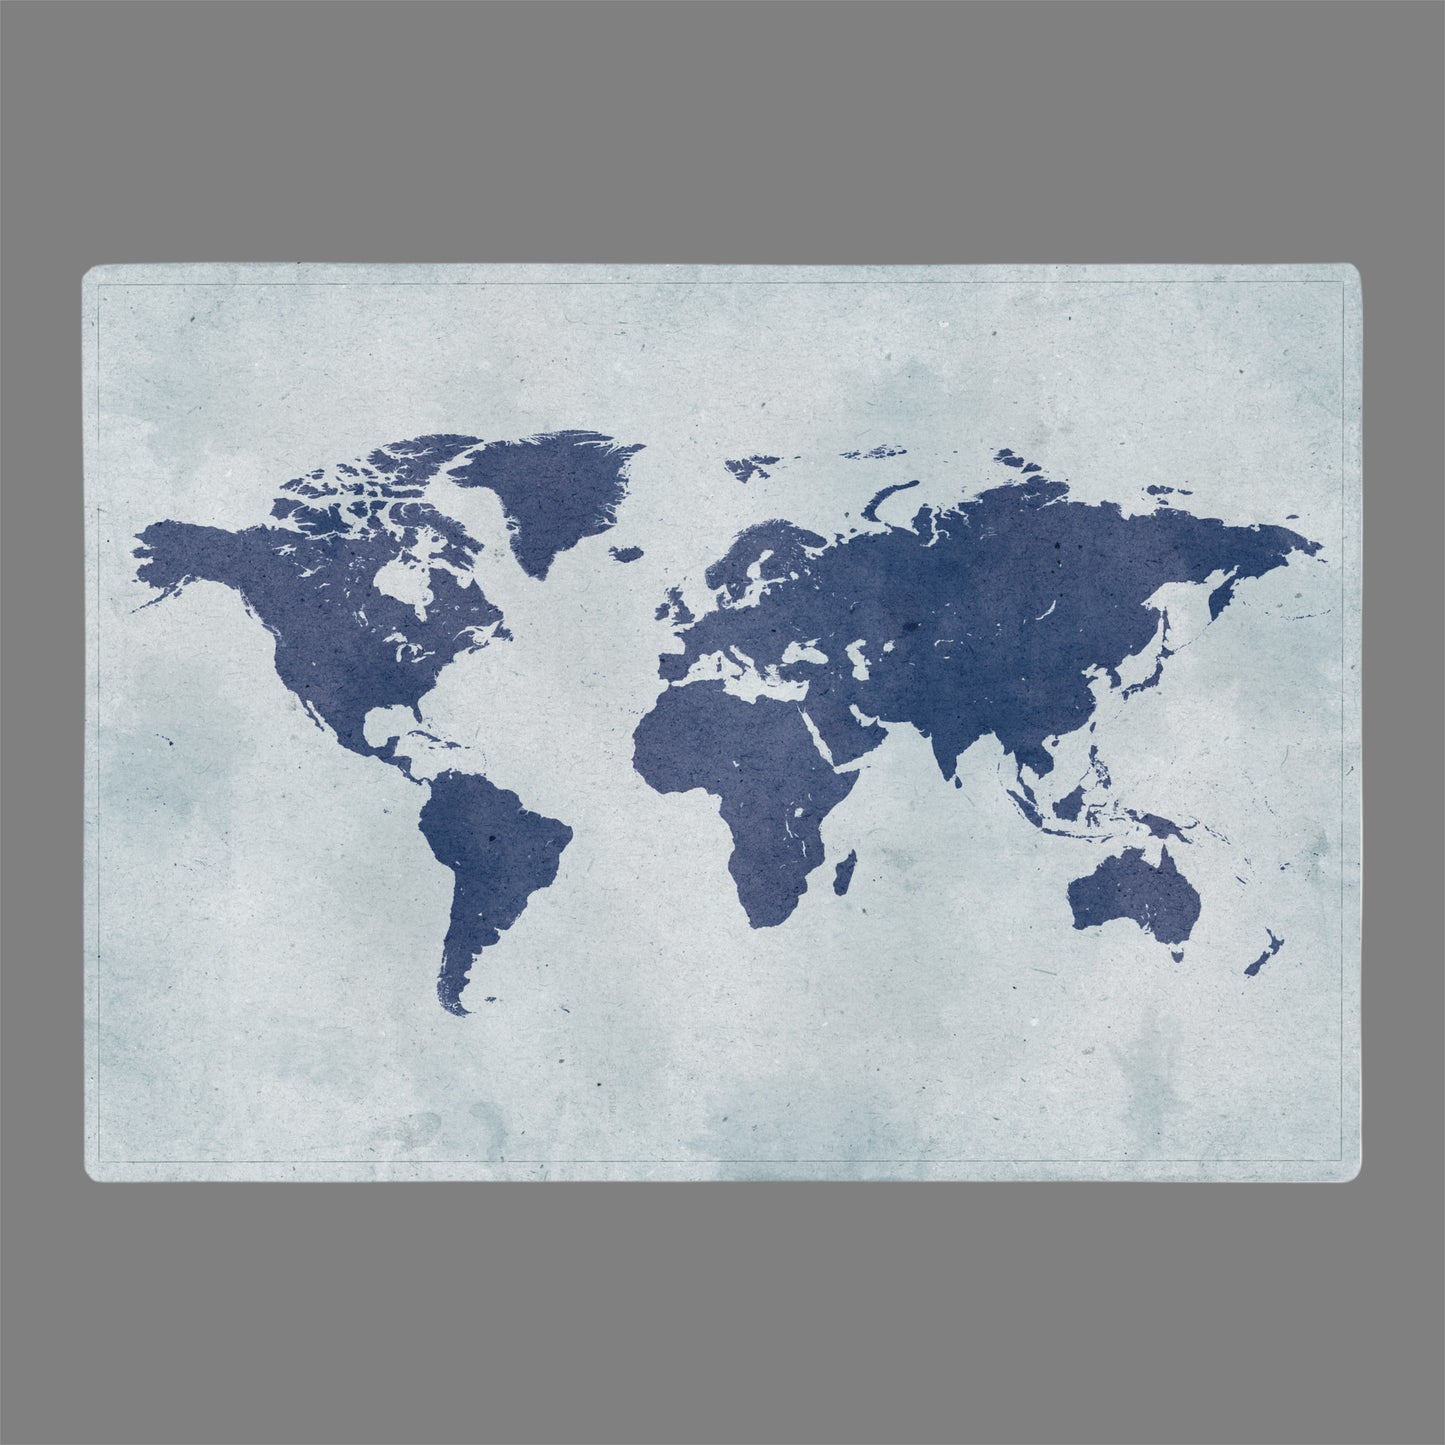 World Map blue printed on a glass cutting board great gift idea